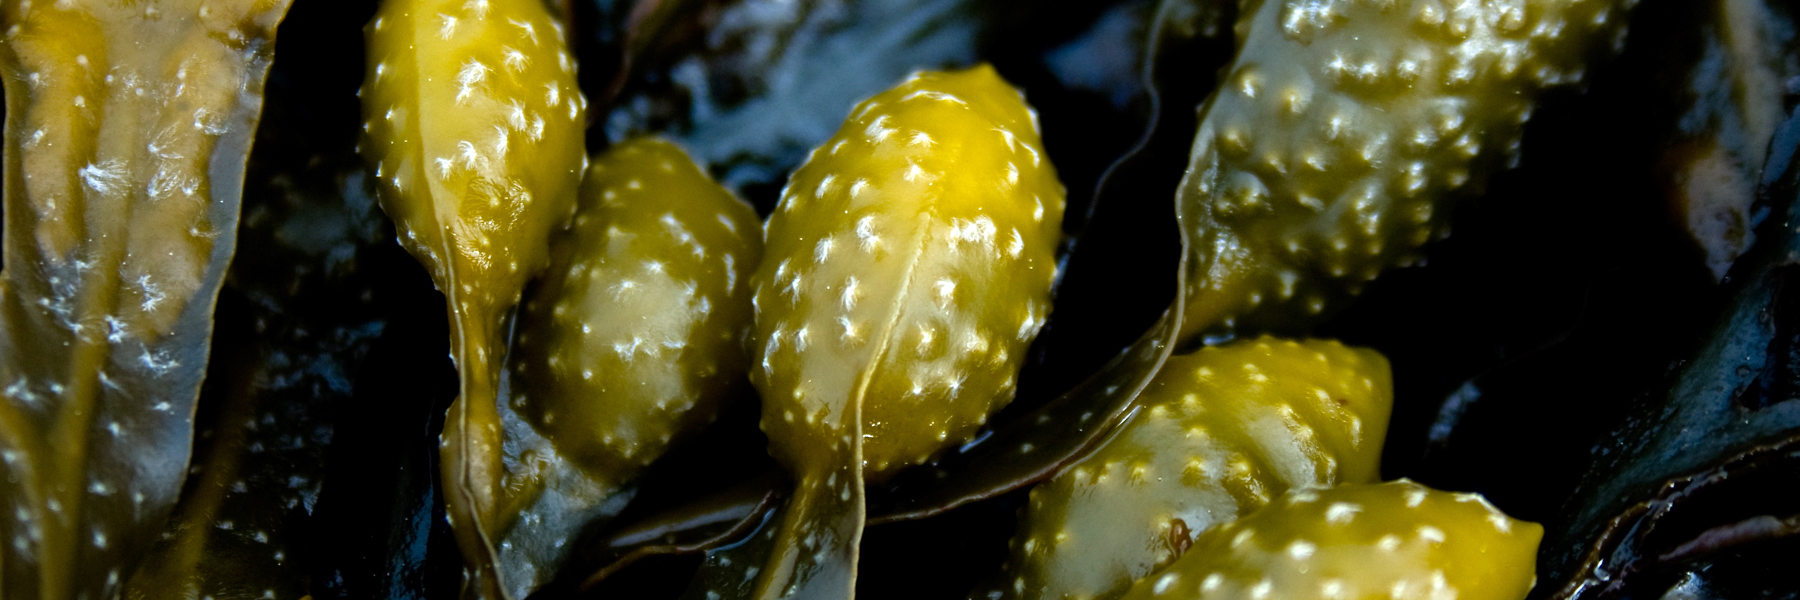 Seaweed extracts